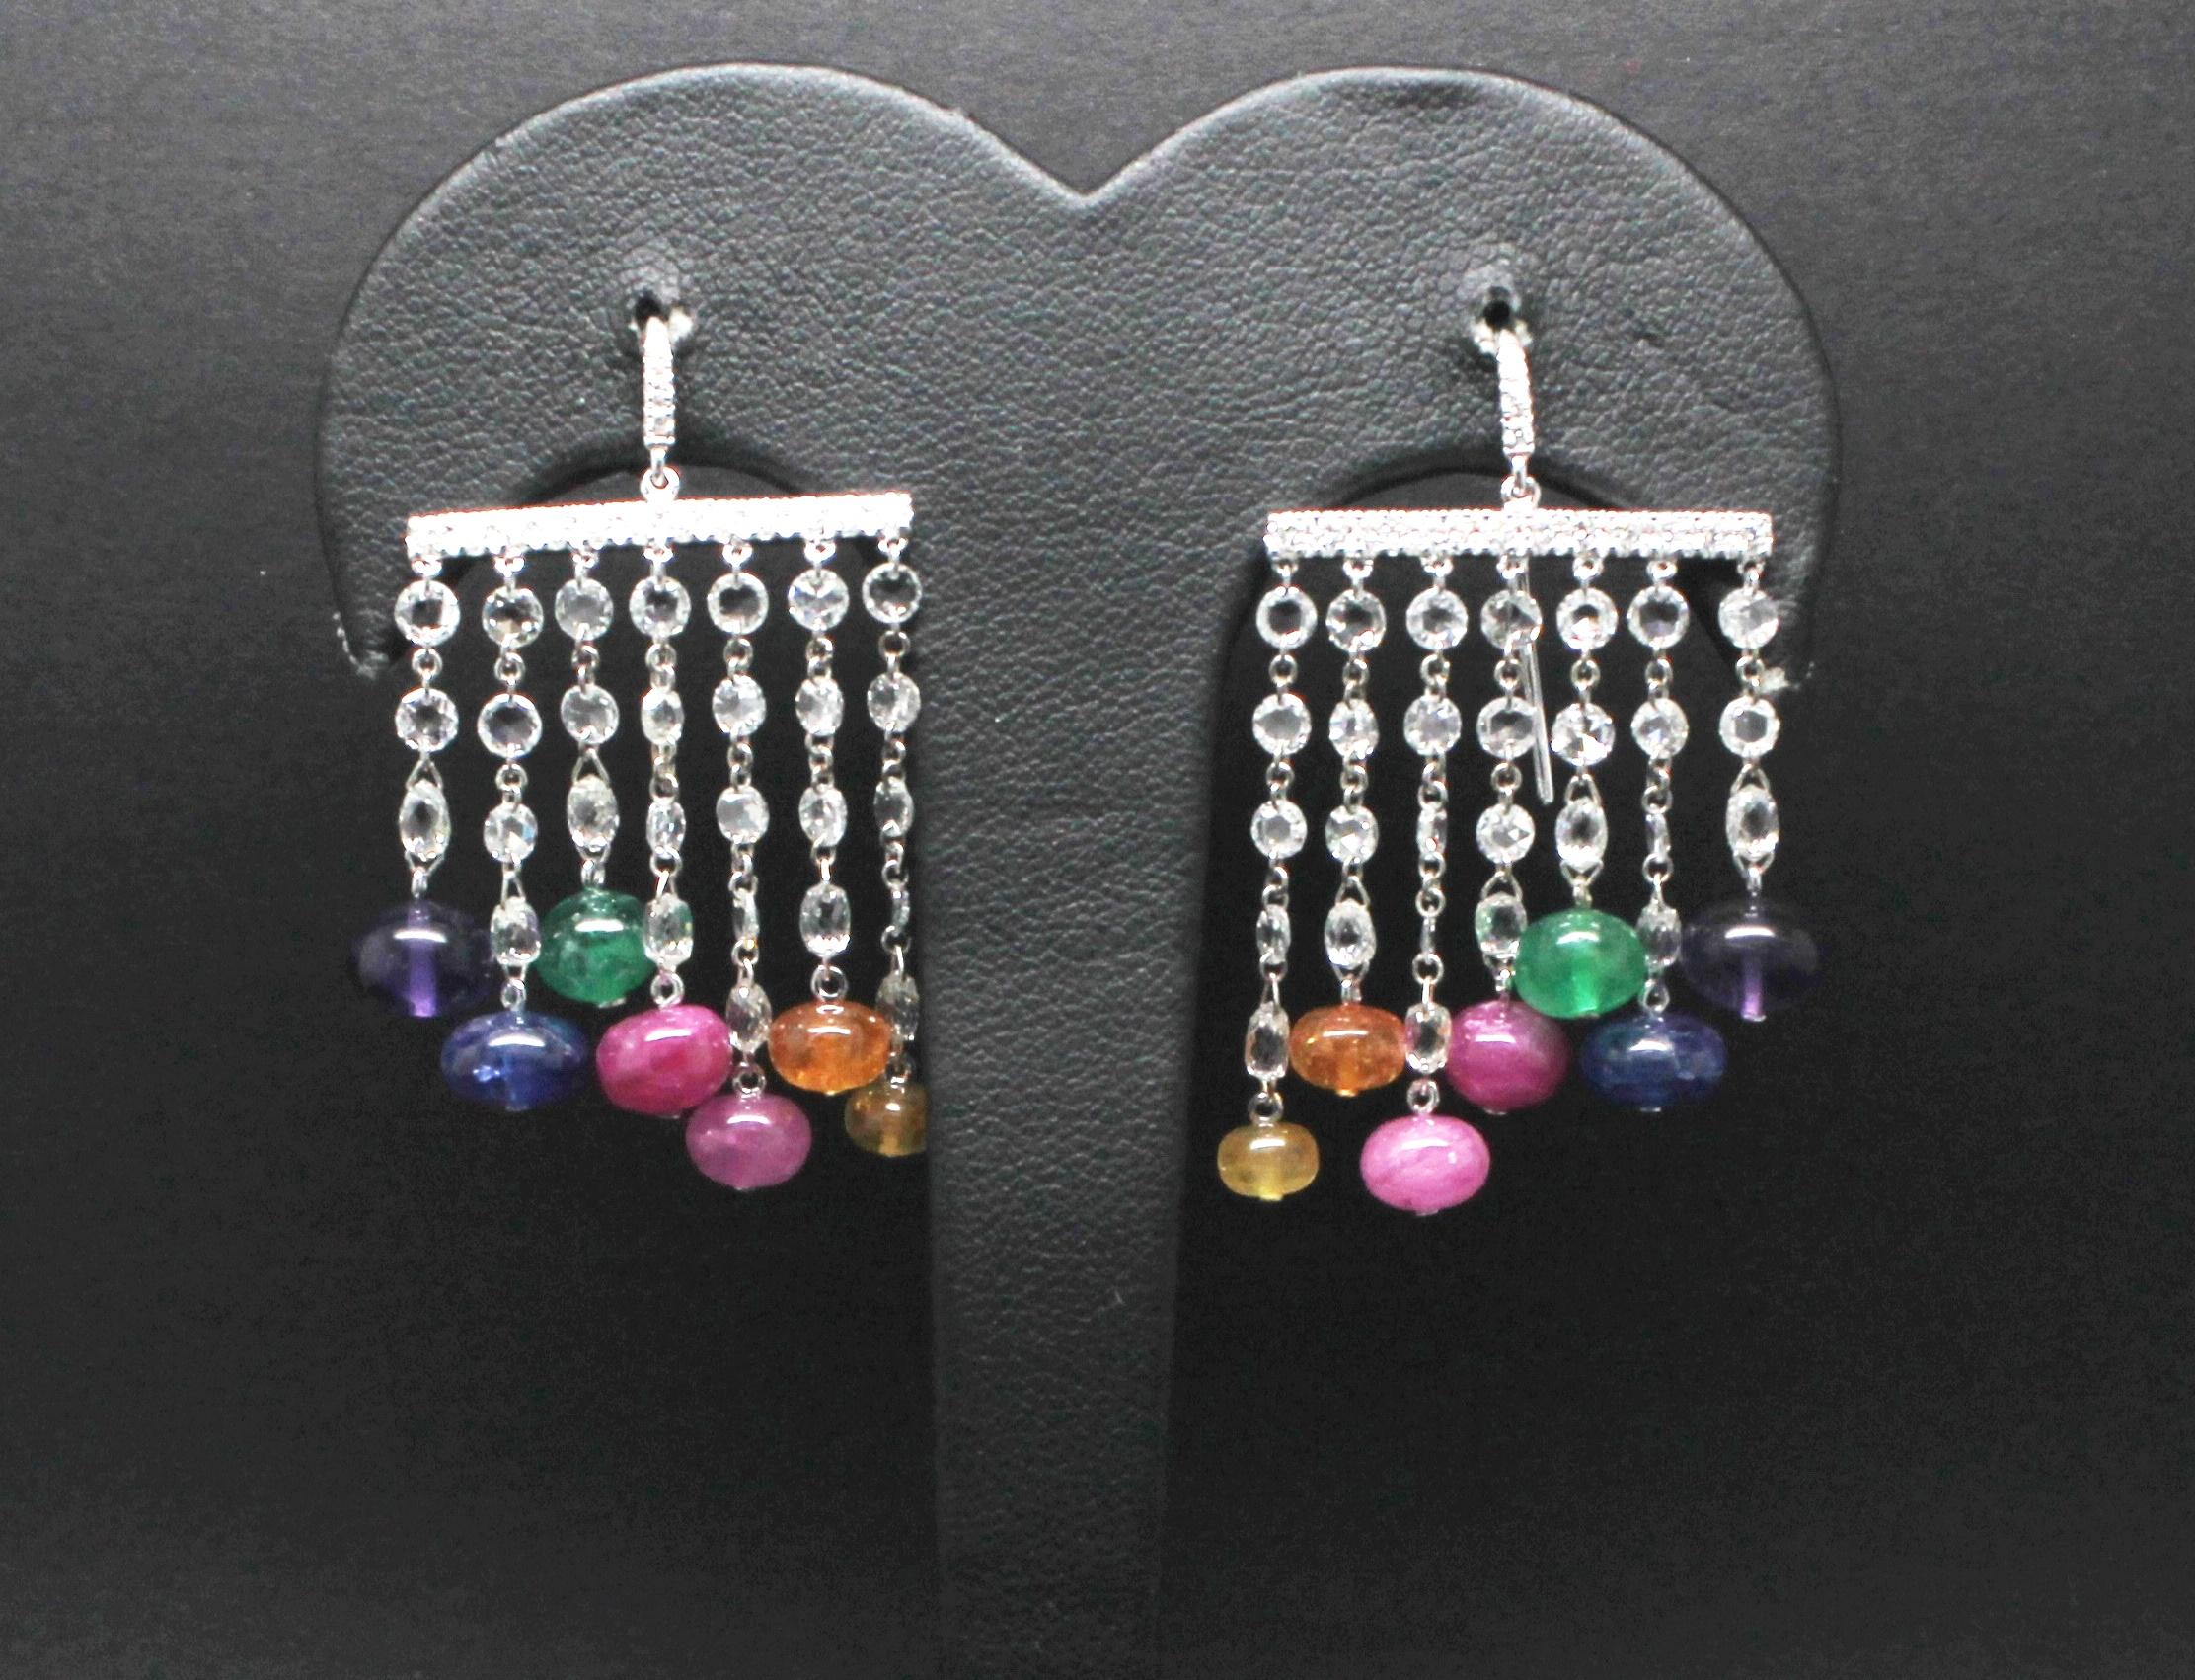 Easy-wear Dangle Earrings, with Multi-Strand Diamond-Chains ended by Colour gemstones.
In these Dandle Earrings are:
emerlad 2.80Kt 
ruby 4.20Kt
blu/pink/yellow sappirhe 9.84Kt
amethyst 3.70Kt
spessorite 2.87Kt
diamonds 3.94Kt

This jewel is